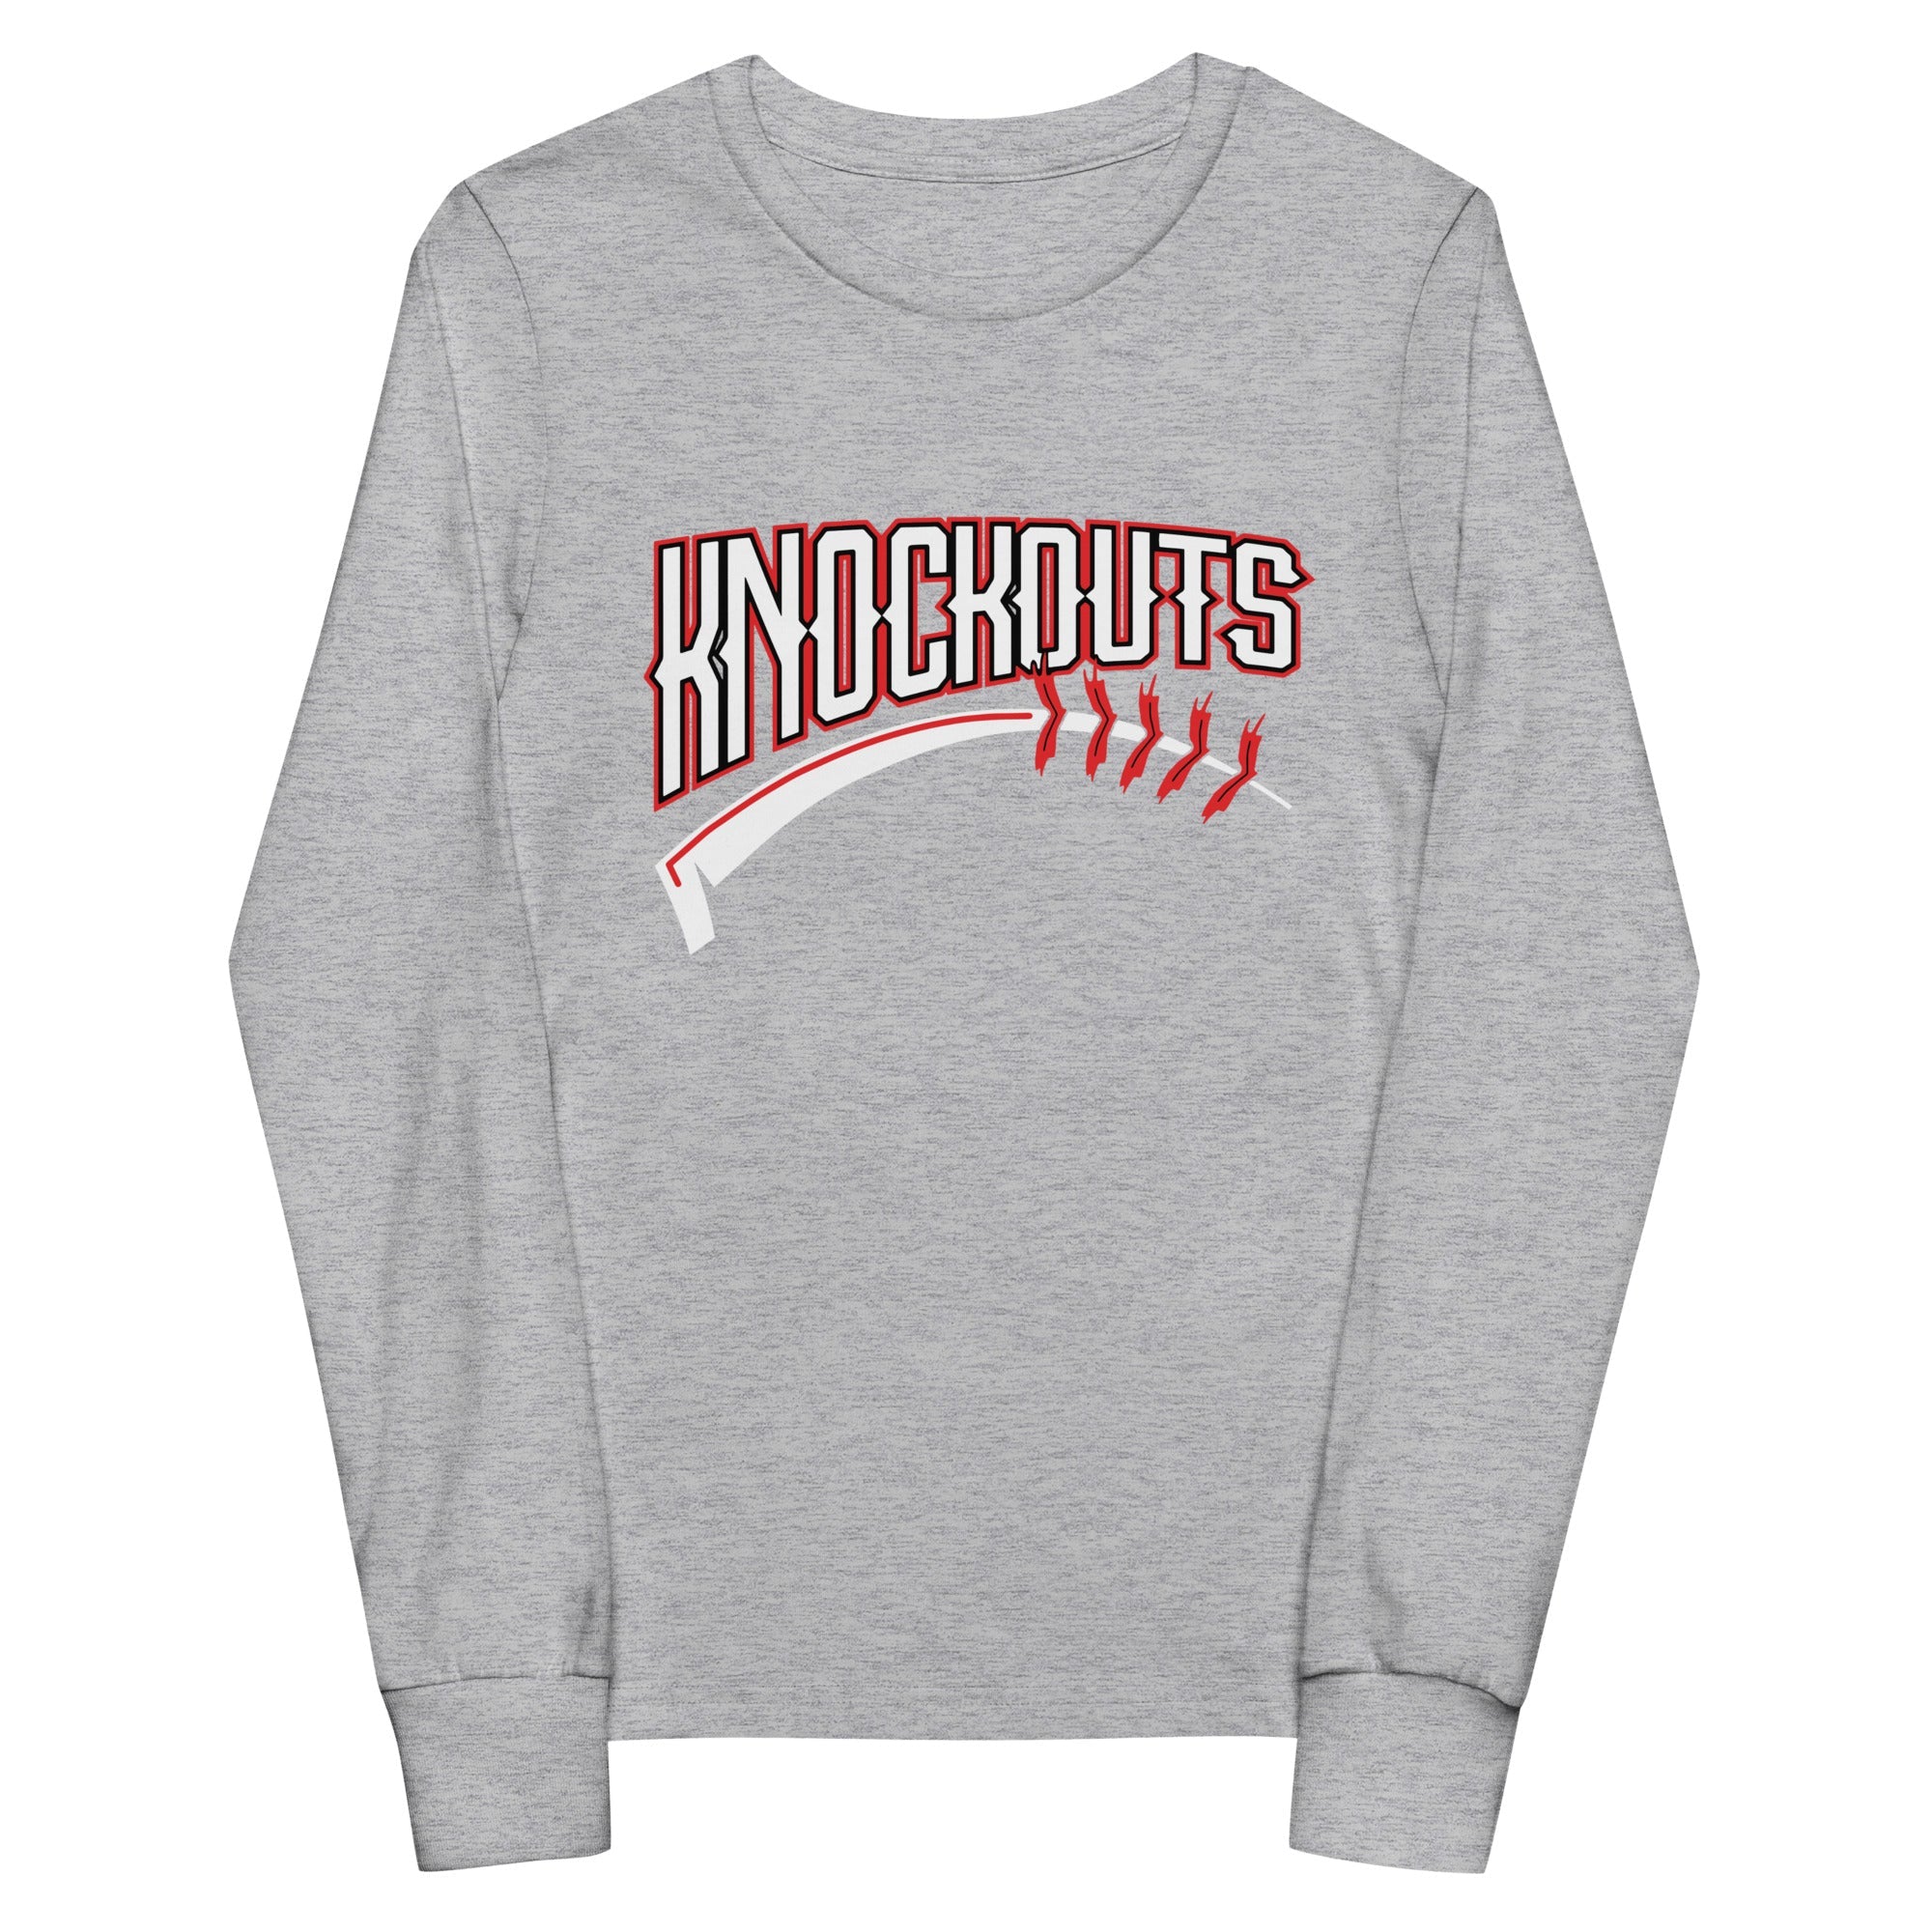 Knockouts Youth long sleeve tee